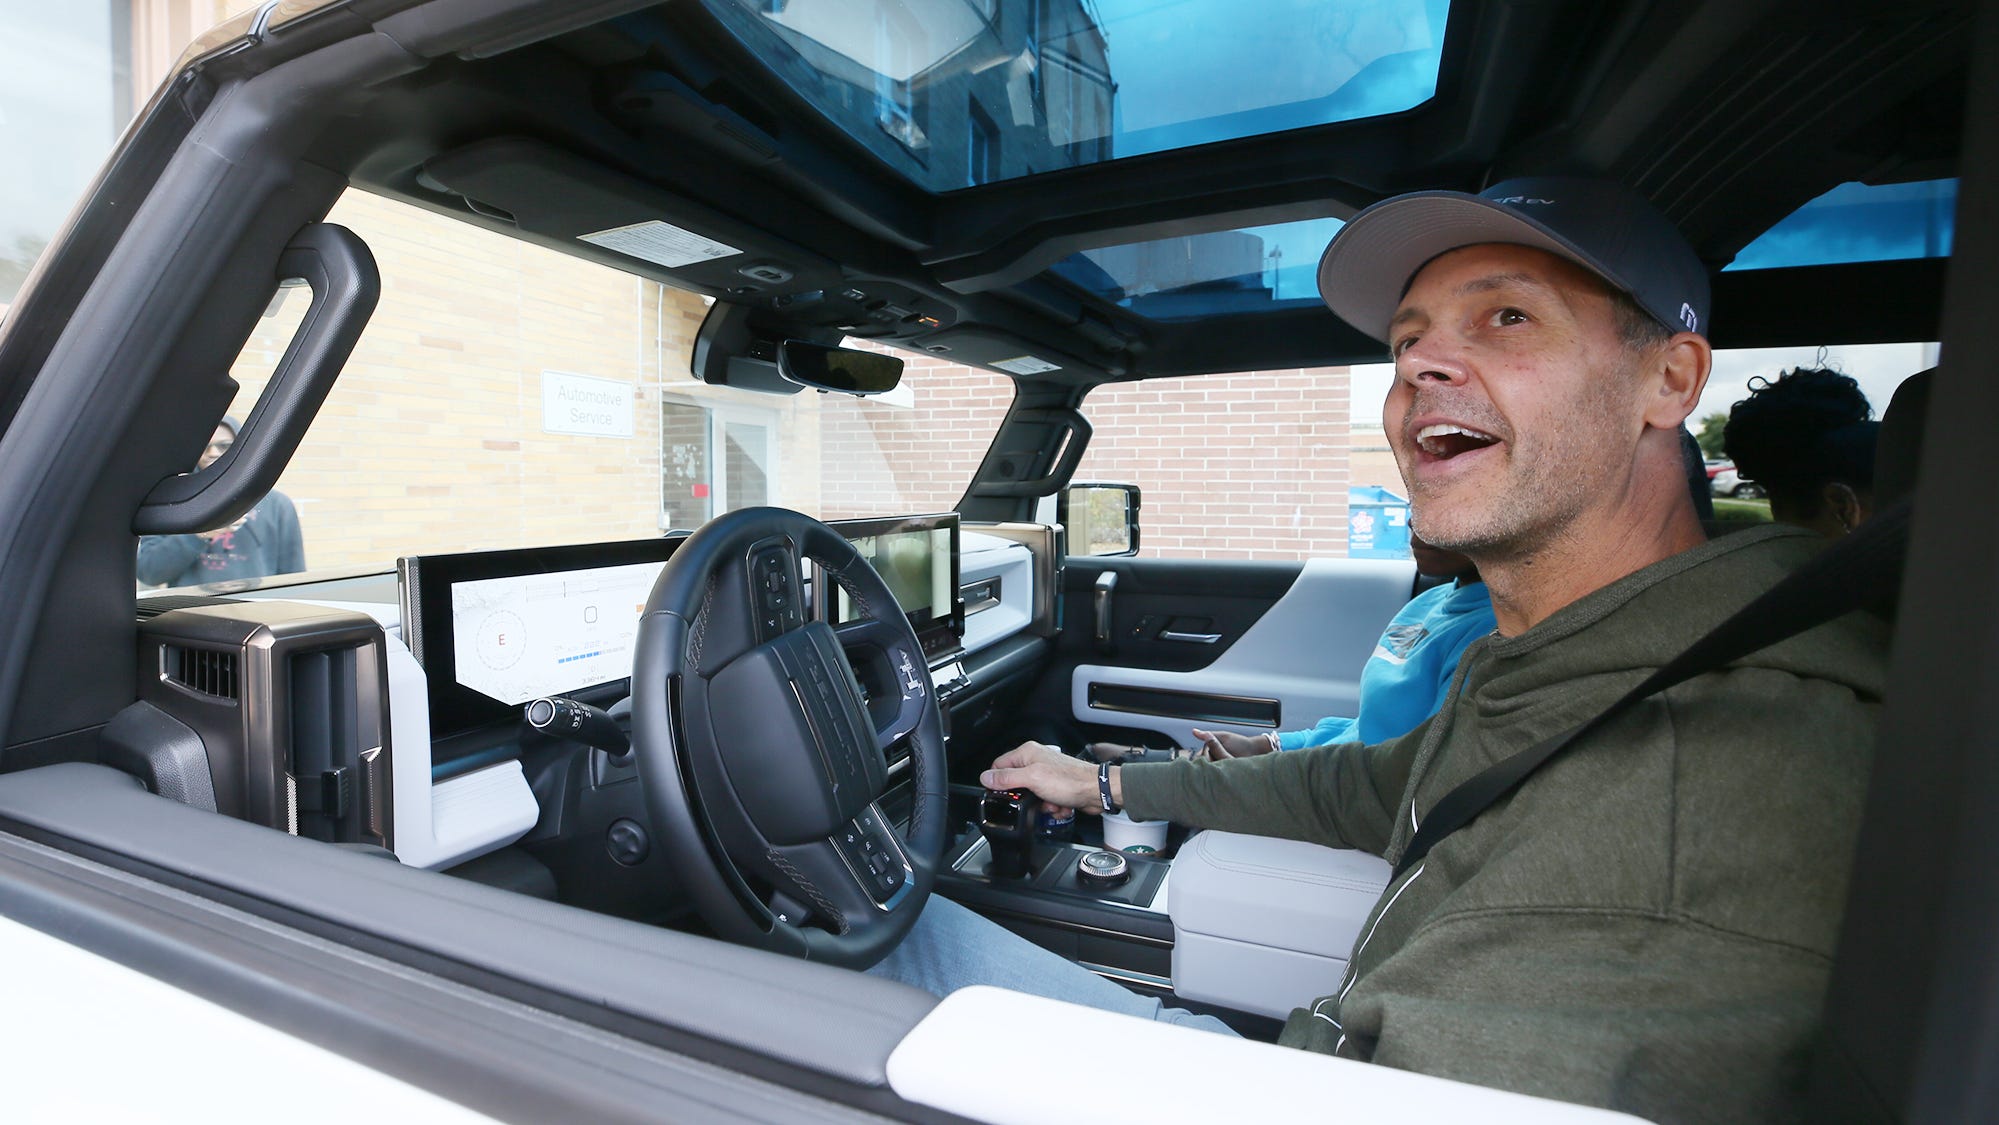 'It's a spaceship': Auto enthusiast brings Hummer EV to East students